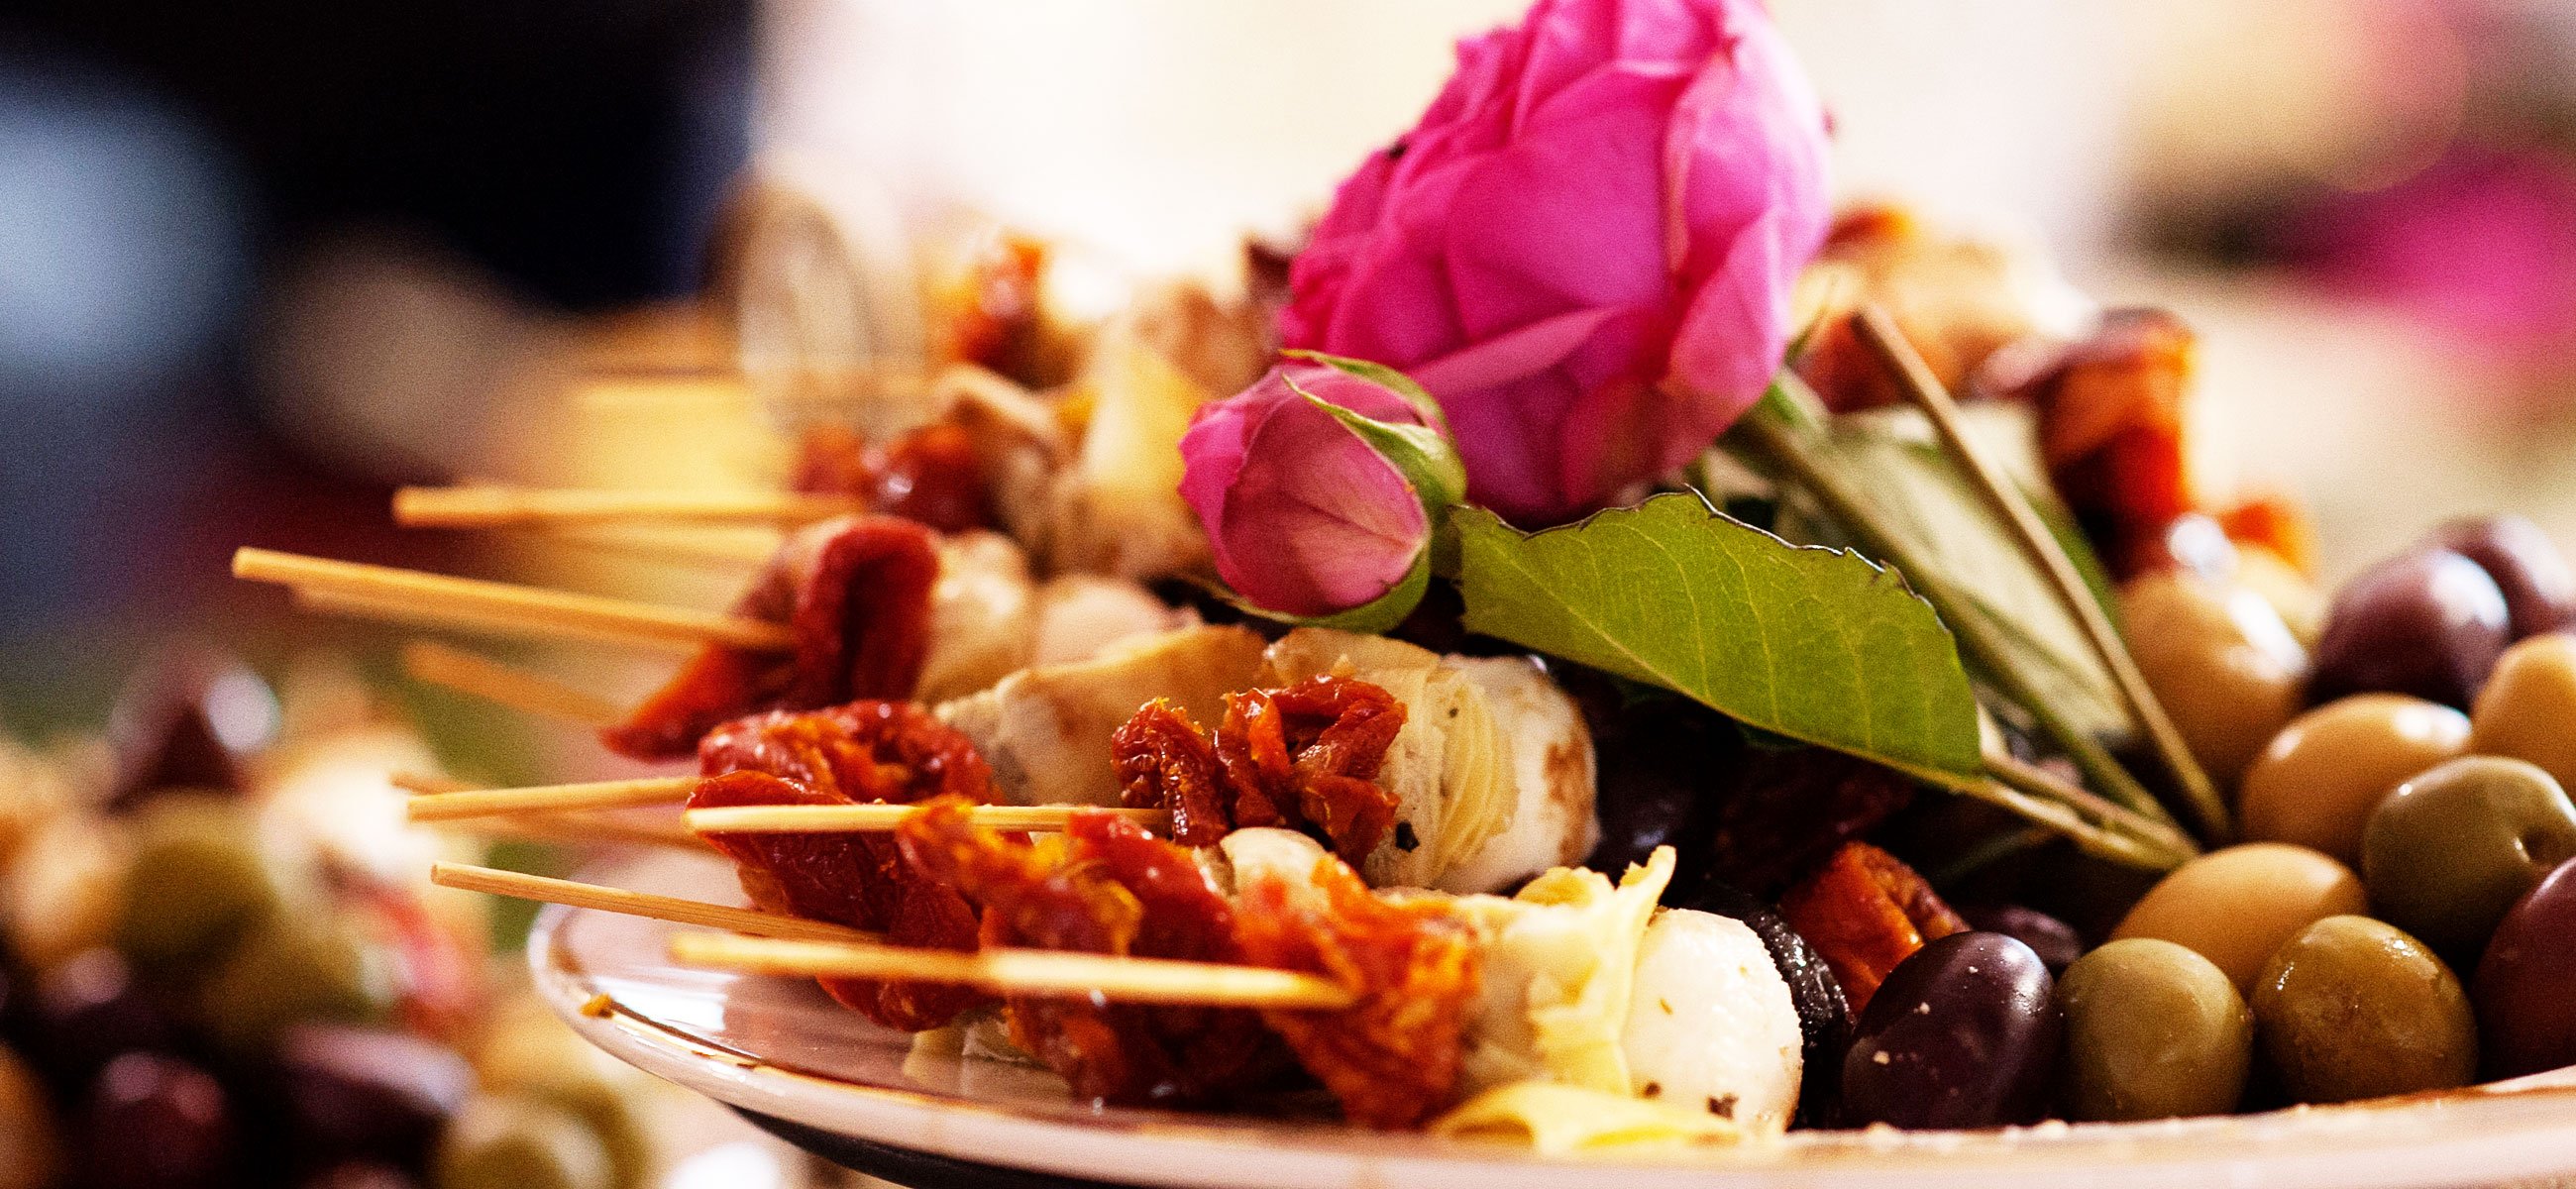 5 Reasons To Consider Private Catering